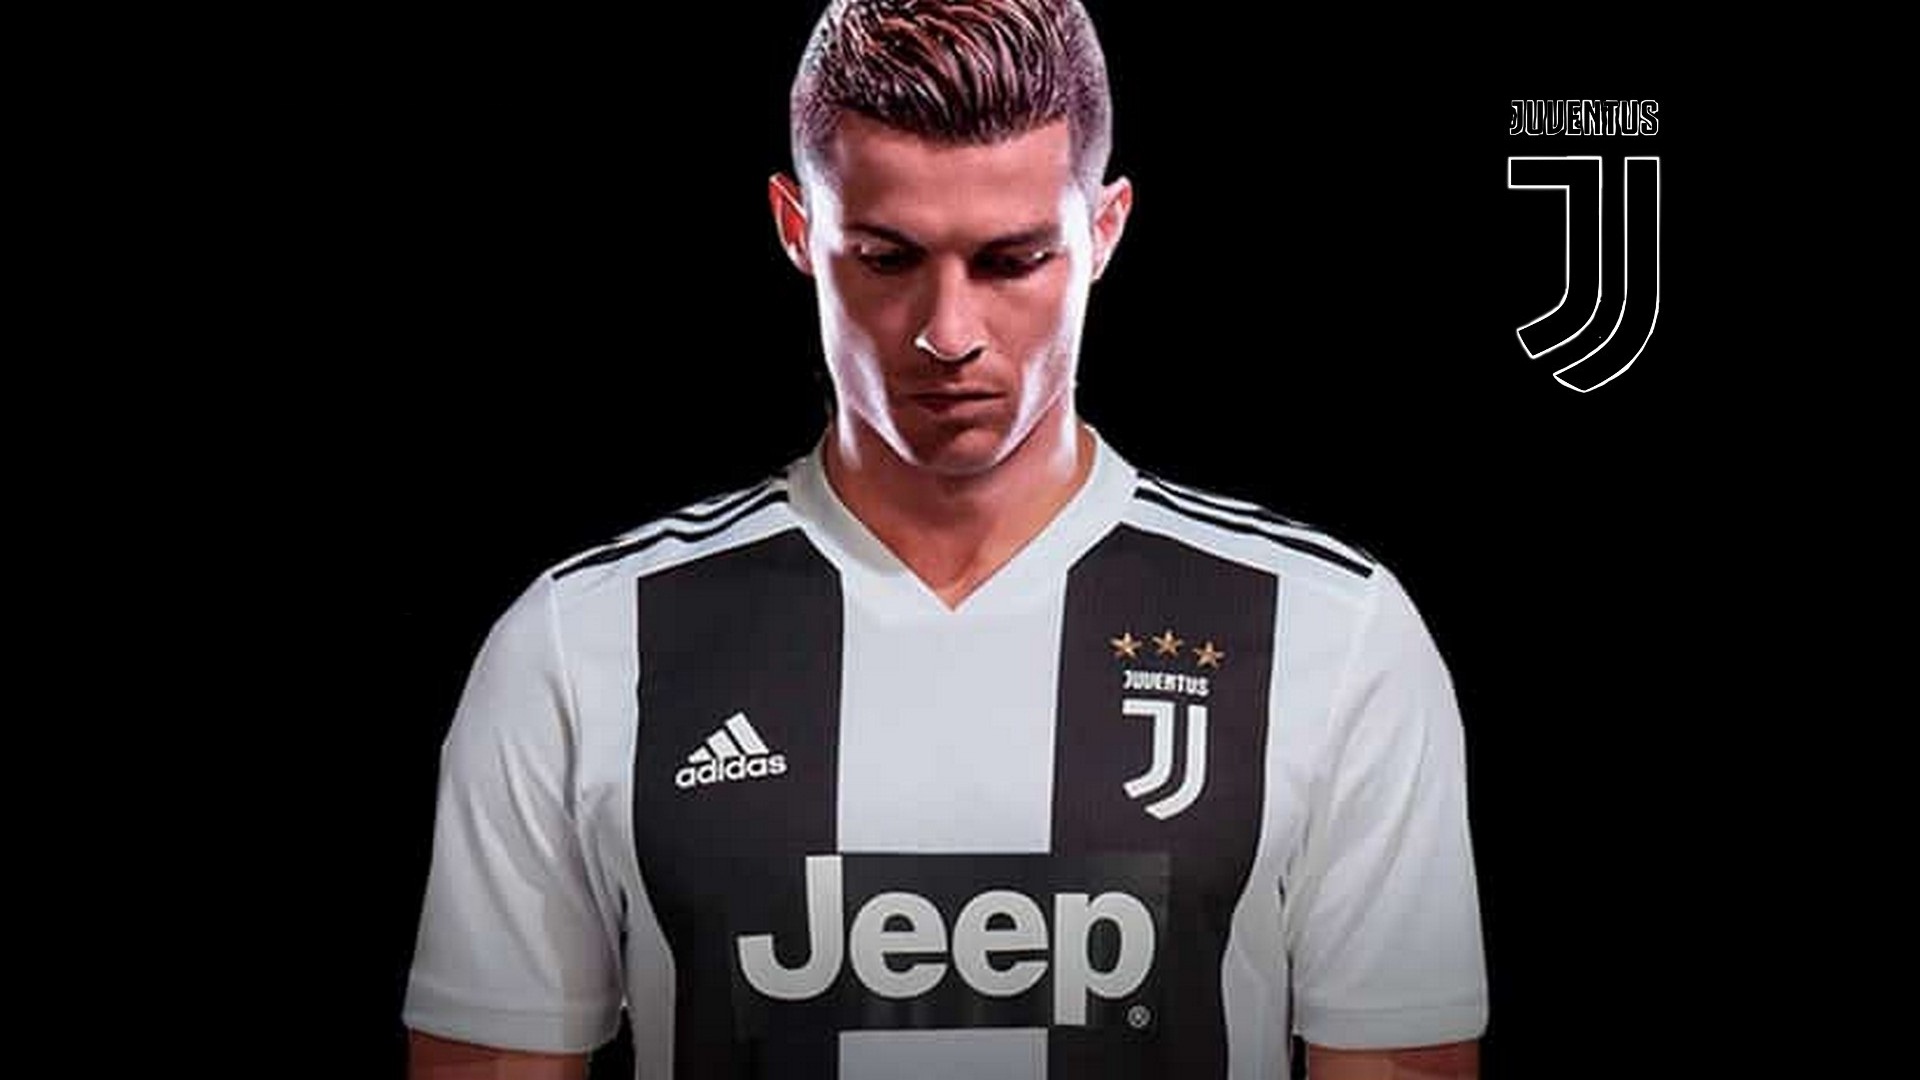 CR7 Juventus Wallpaper HD with resolution 1920x1080 pixel. You can make this wallpaper for your Mac or Windows Desktop Background, iPhone, Android or Tablet and another Smartphone device